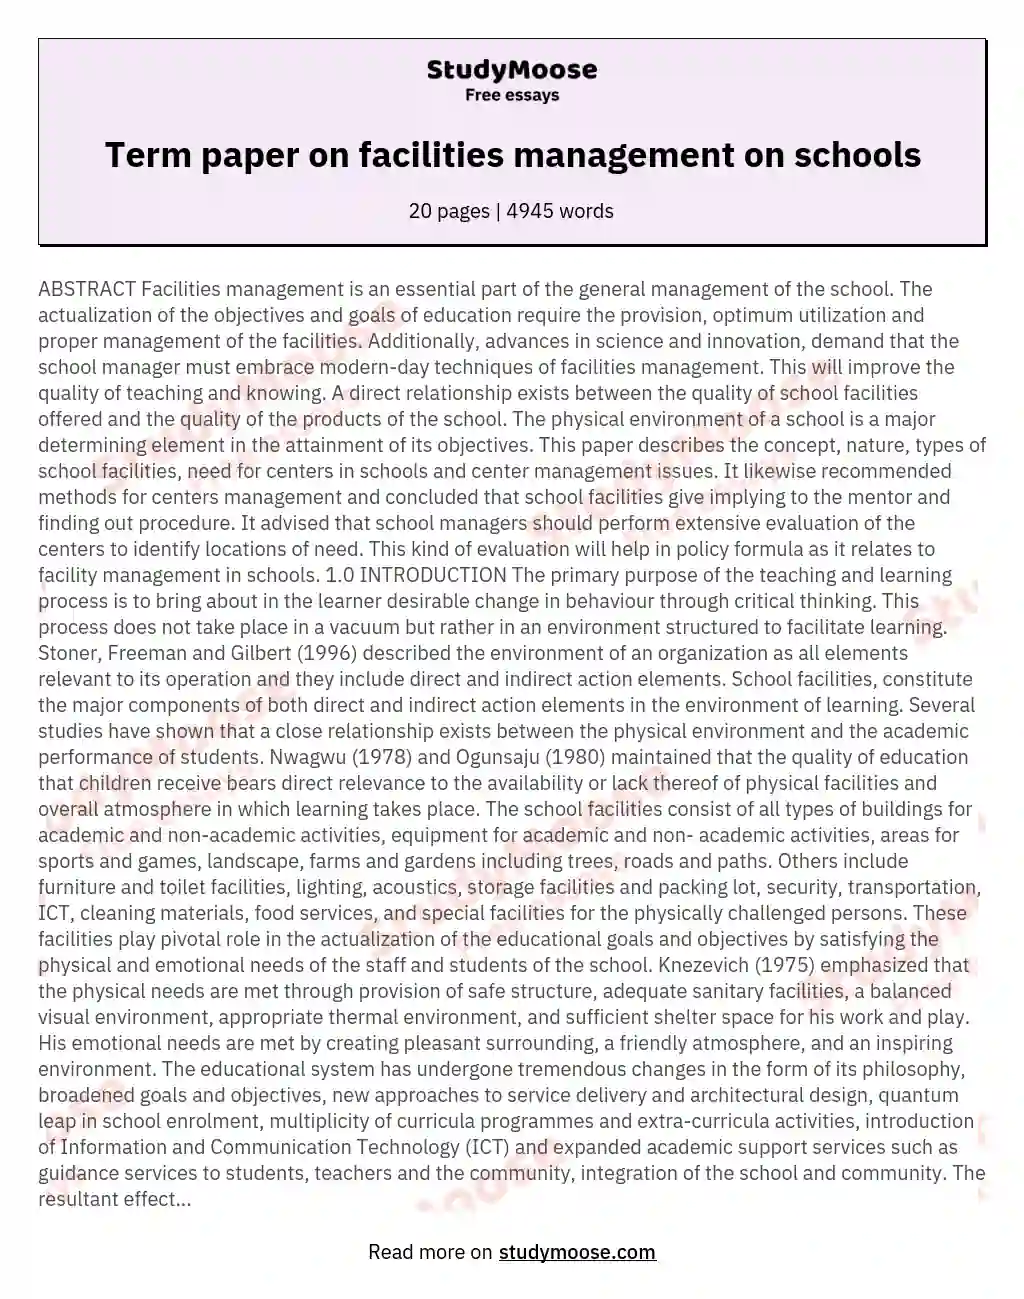 Term paper on facilities management on schools essay